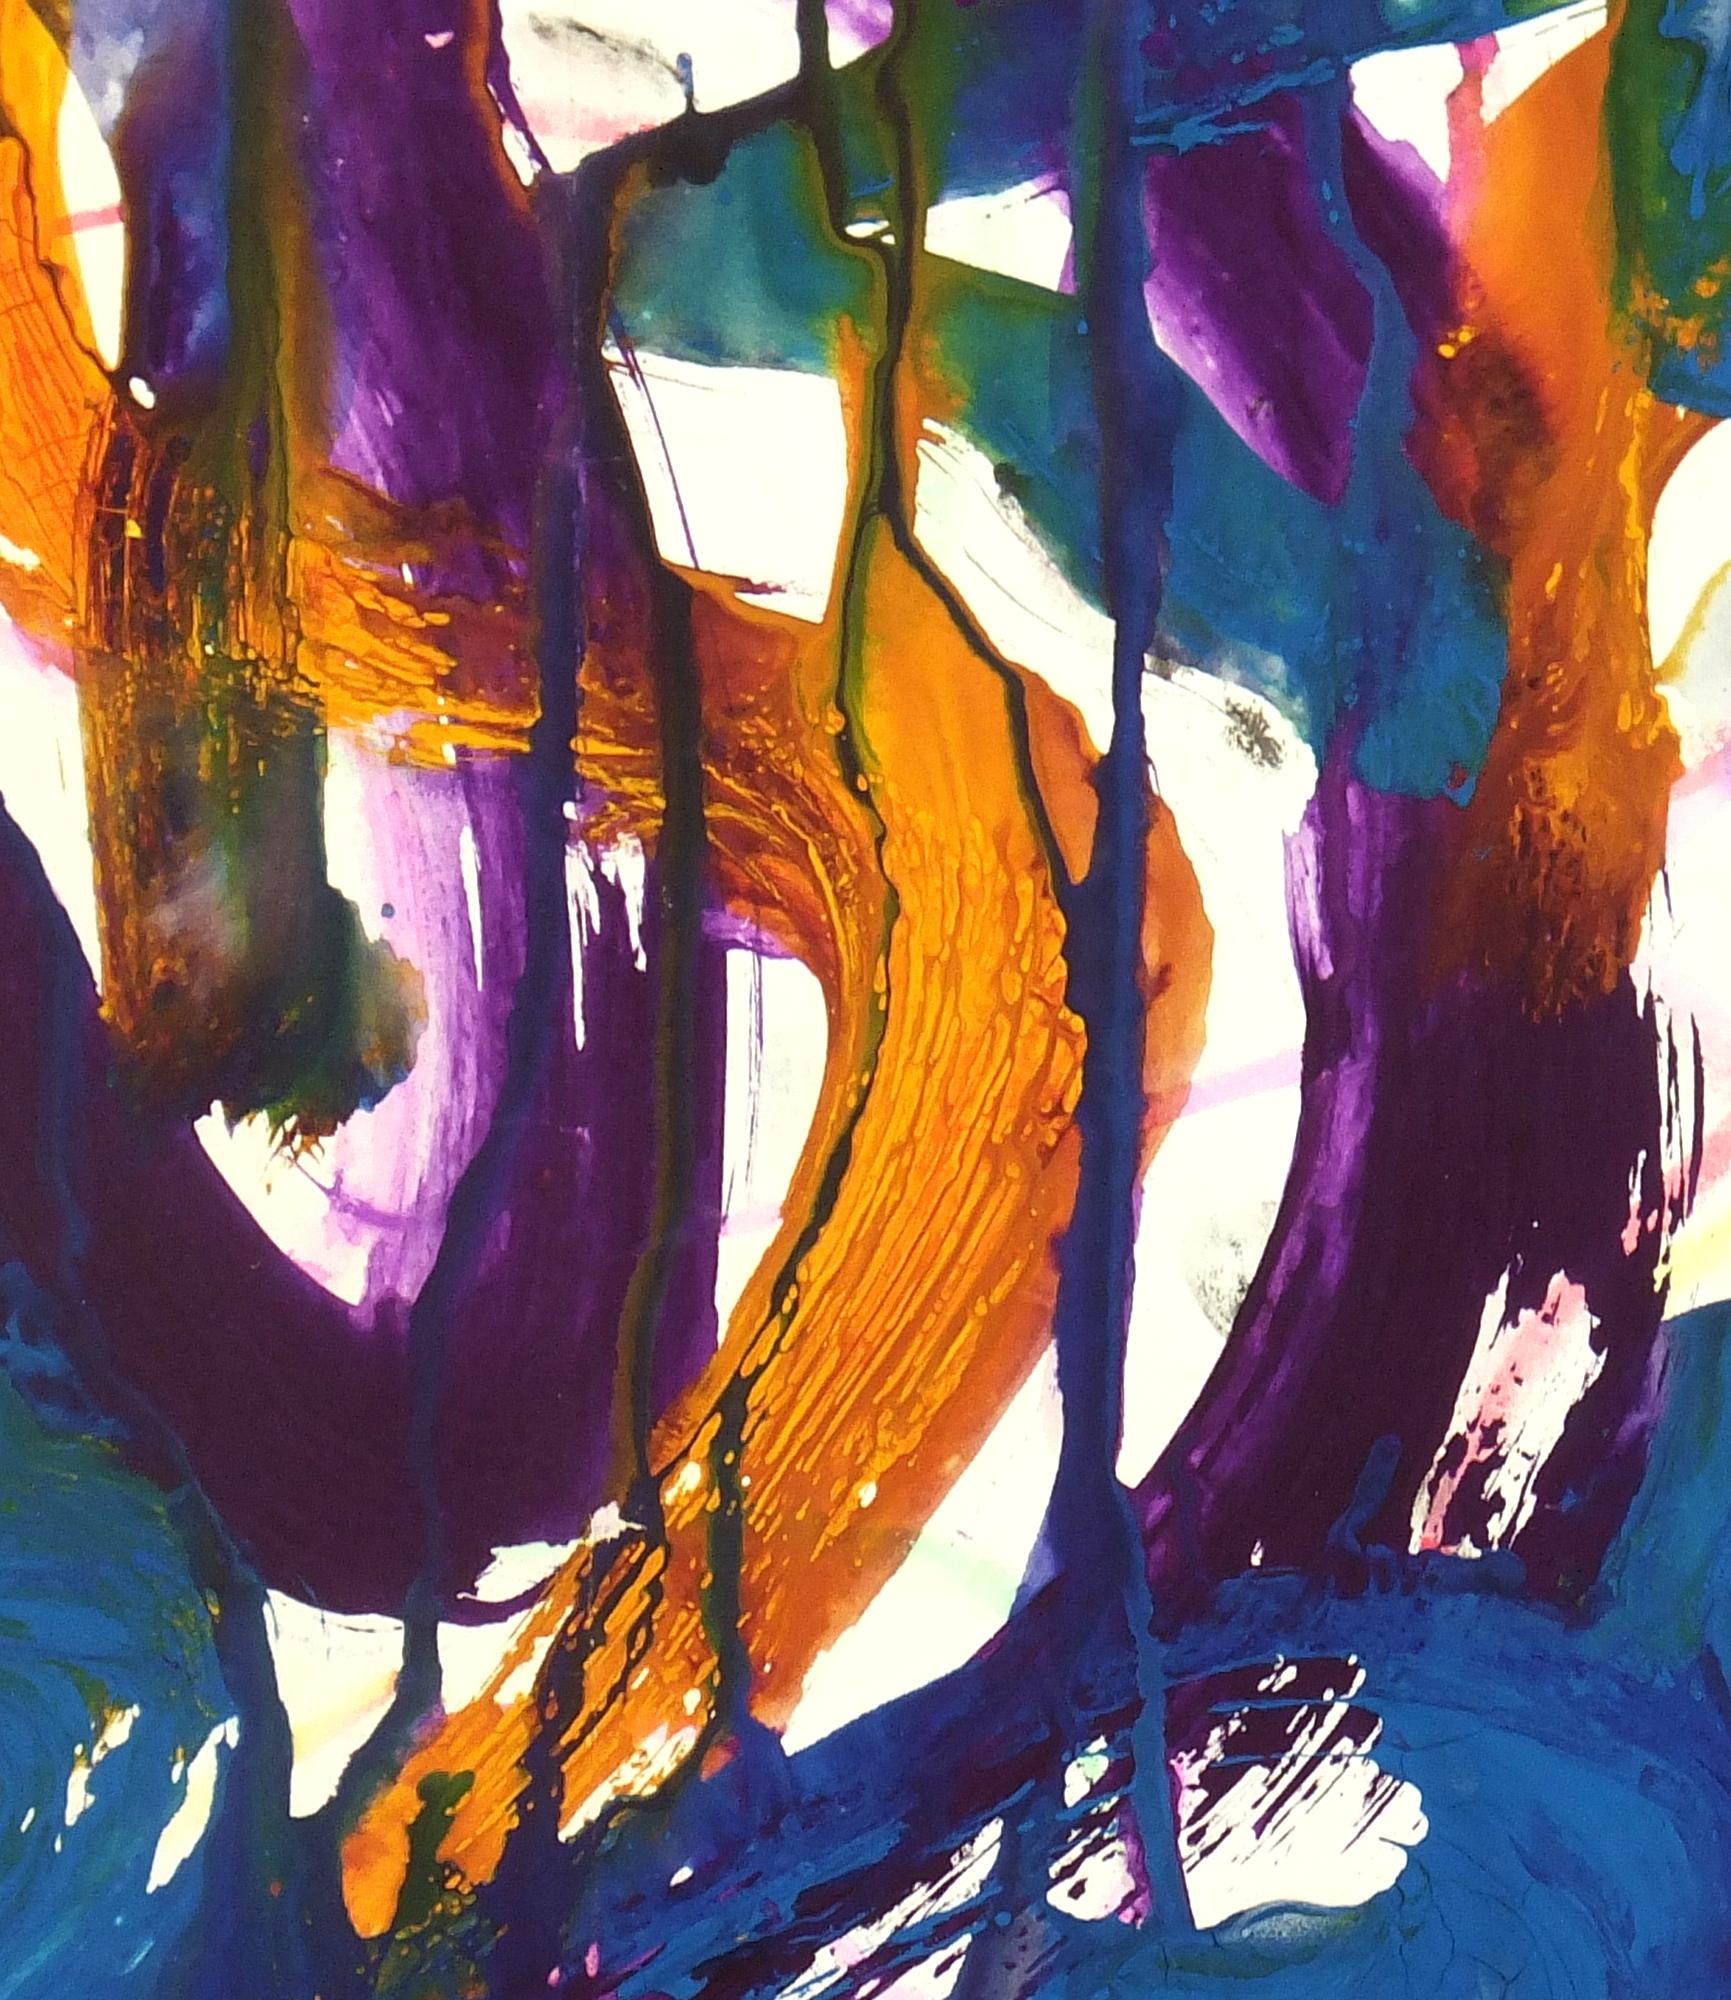 Vibrant Color Abstract Twists and Turns - Painting by Stephen Priestner